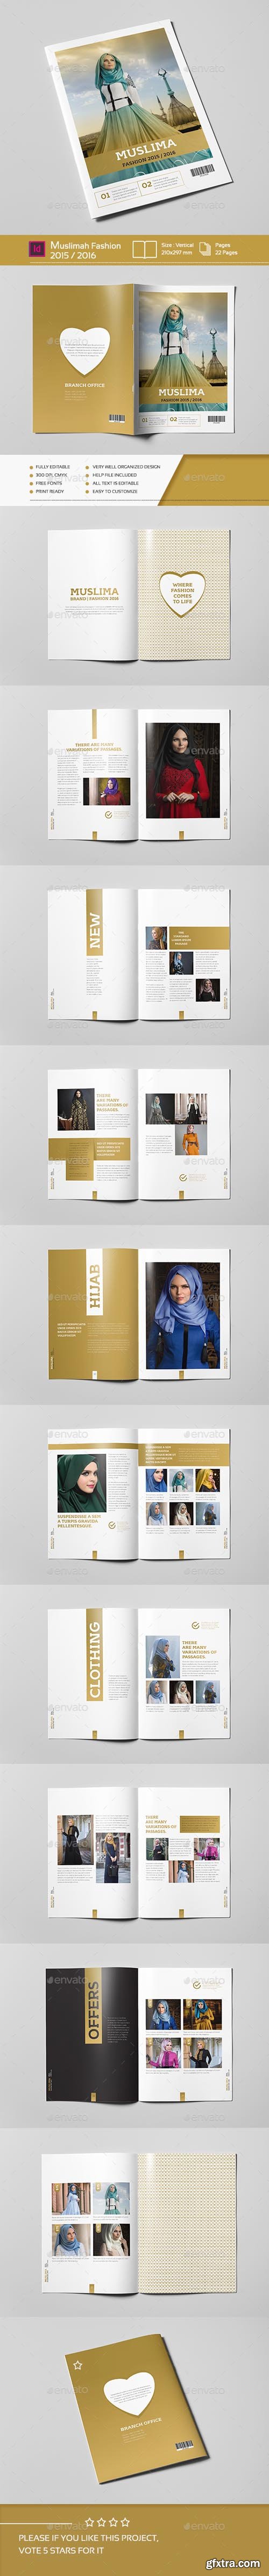 GR - Muslimah Fashion 22 Pages A4 14031552